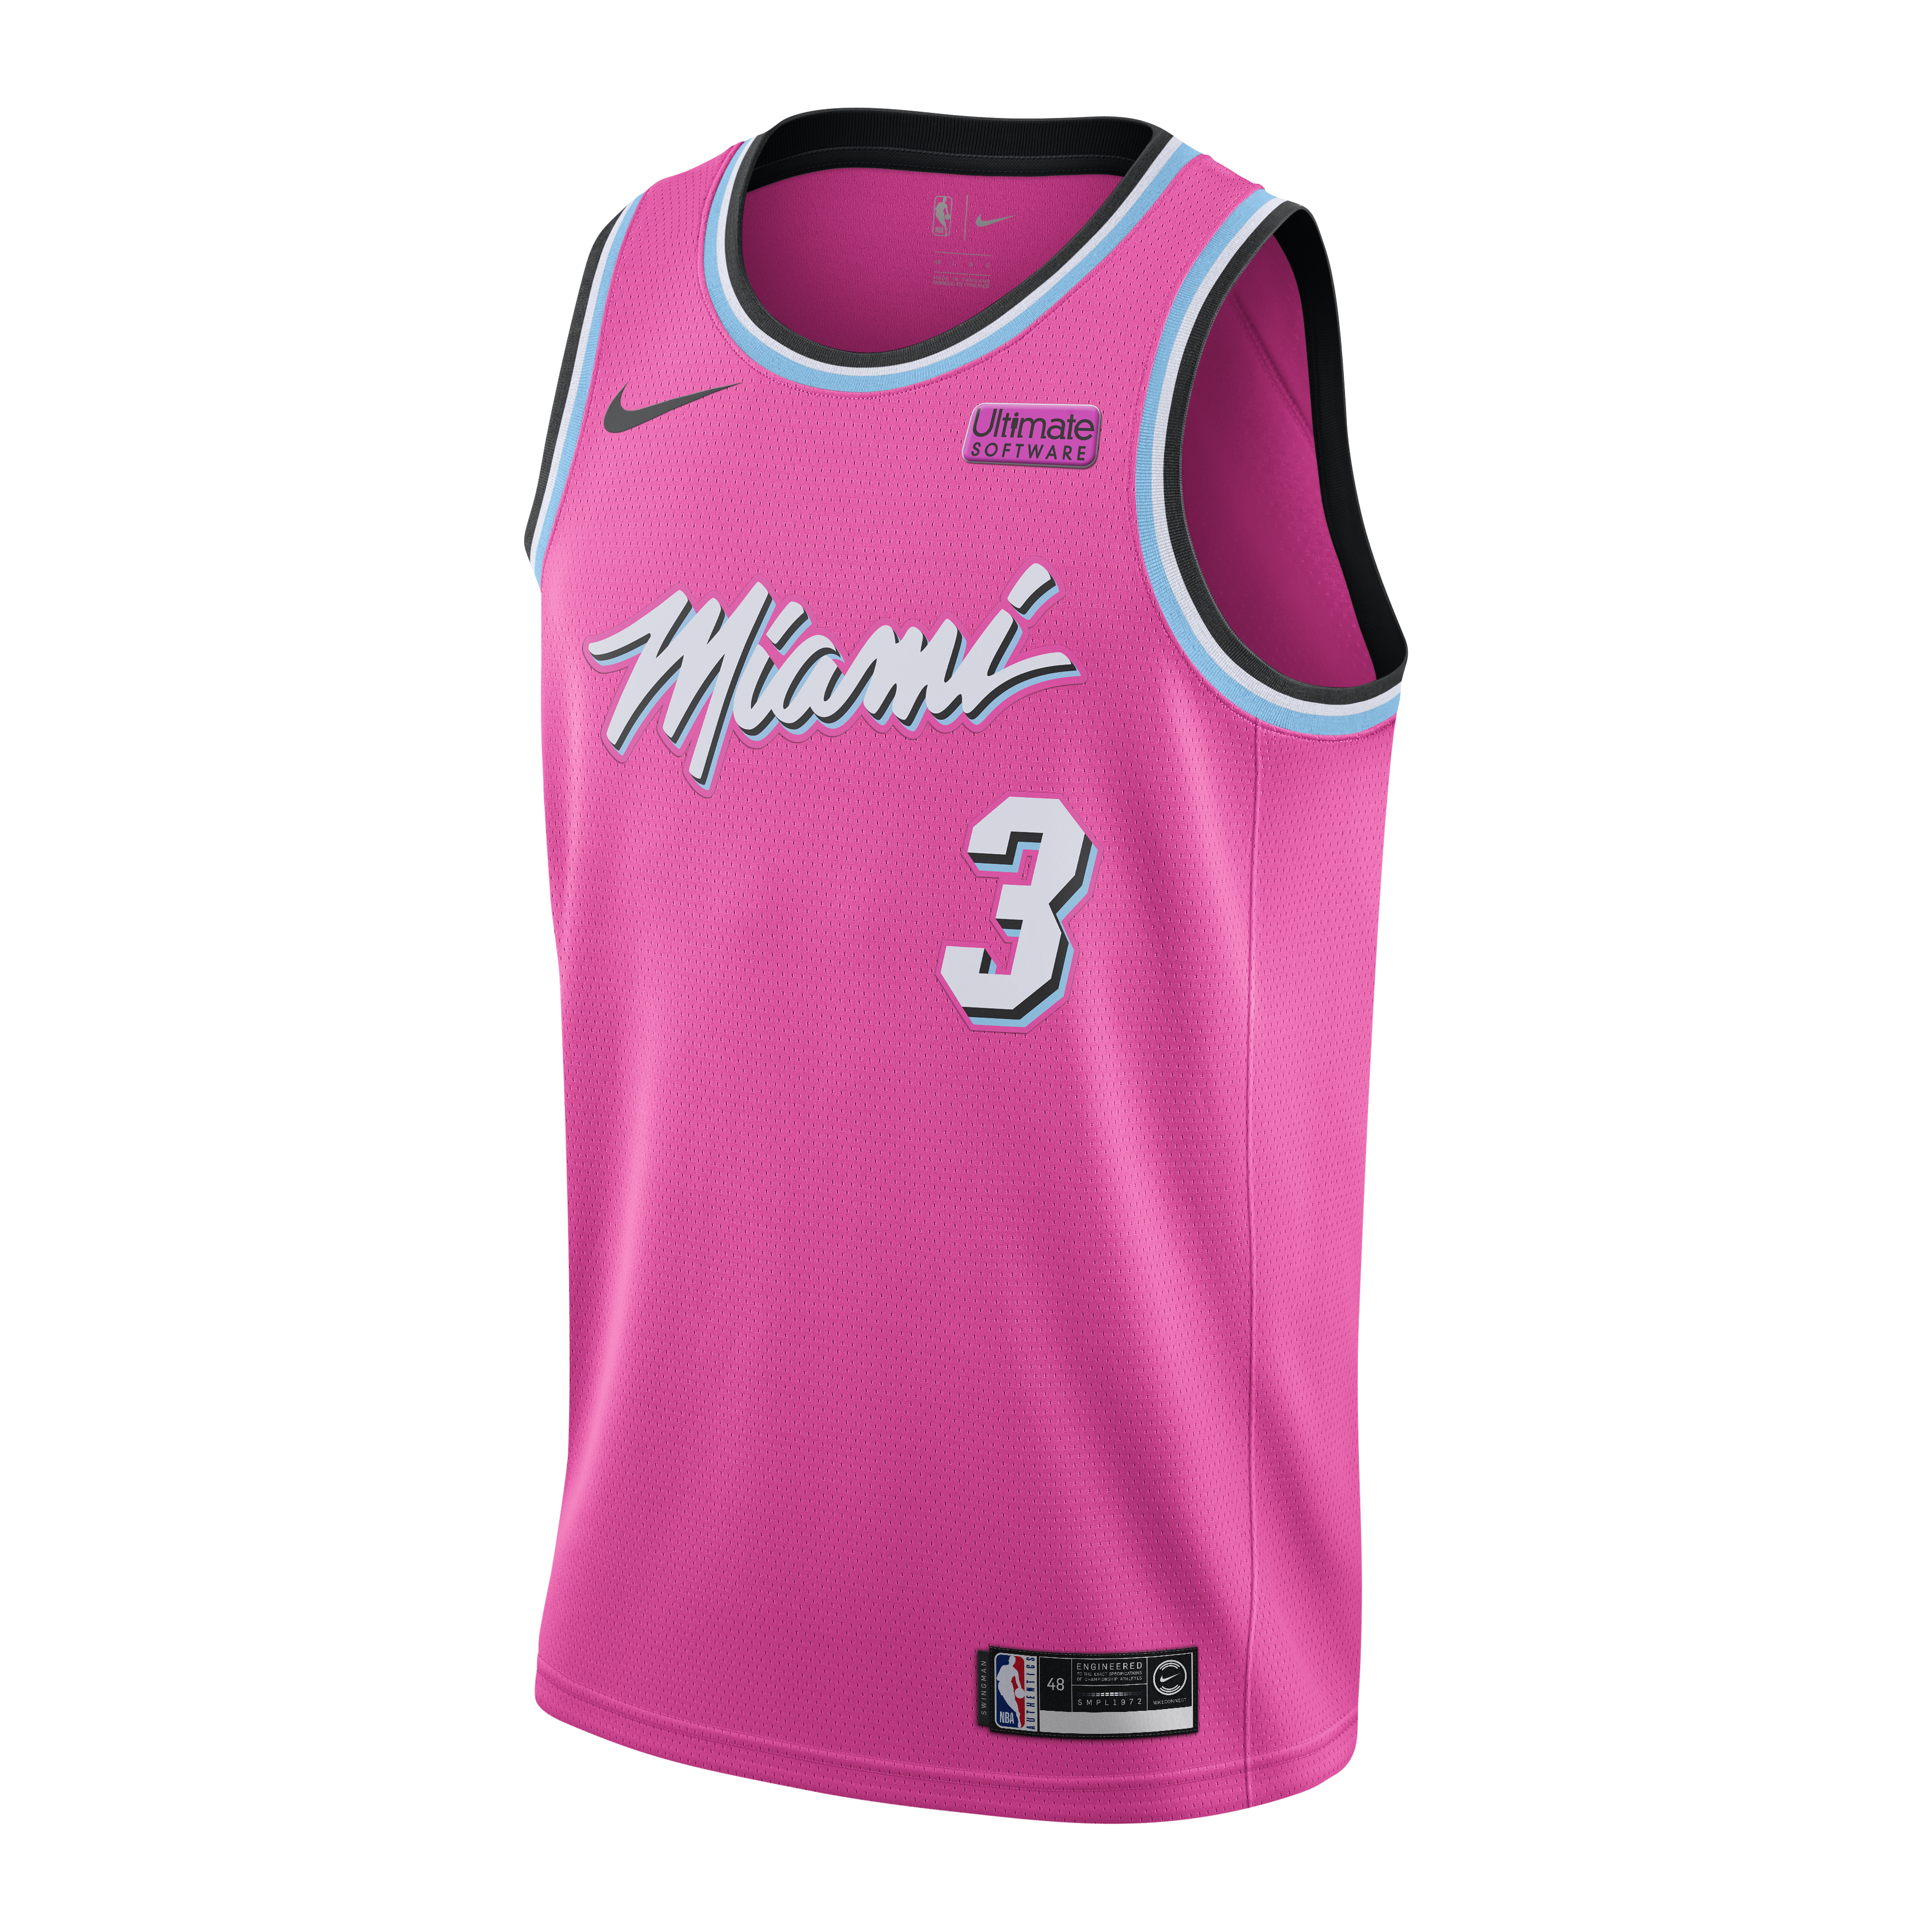 d wade miami vice jersey pink